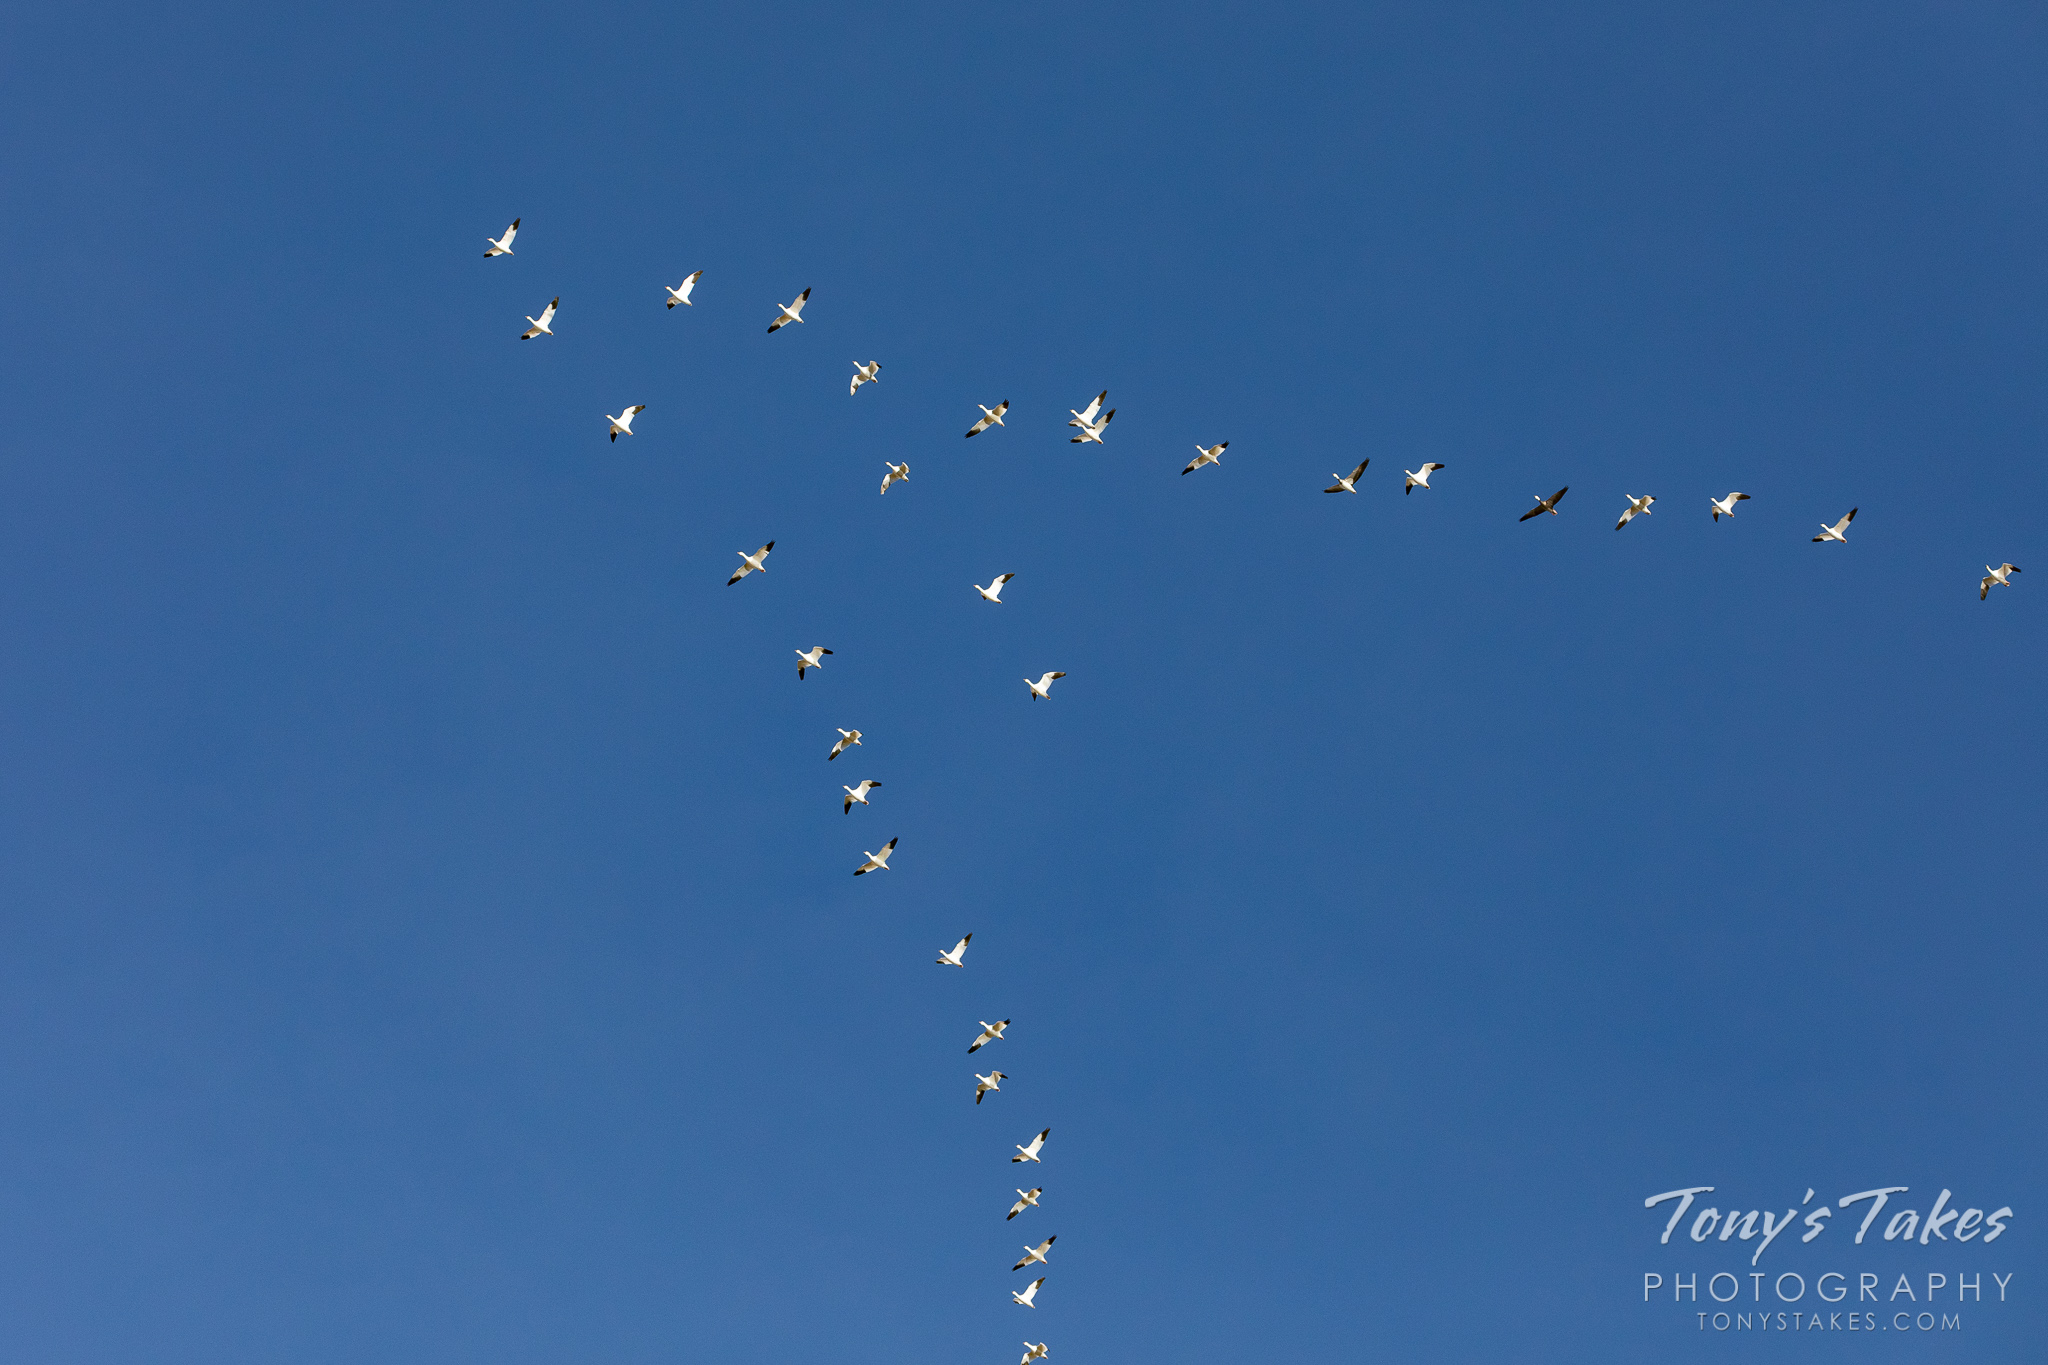 Snow geese in the skies over eastern Colorado as they migrate north. (© Tony’s Takes)